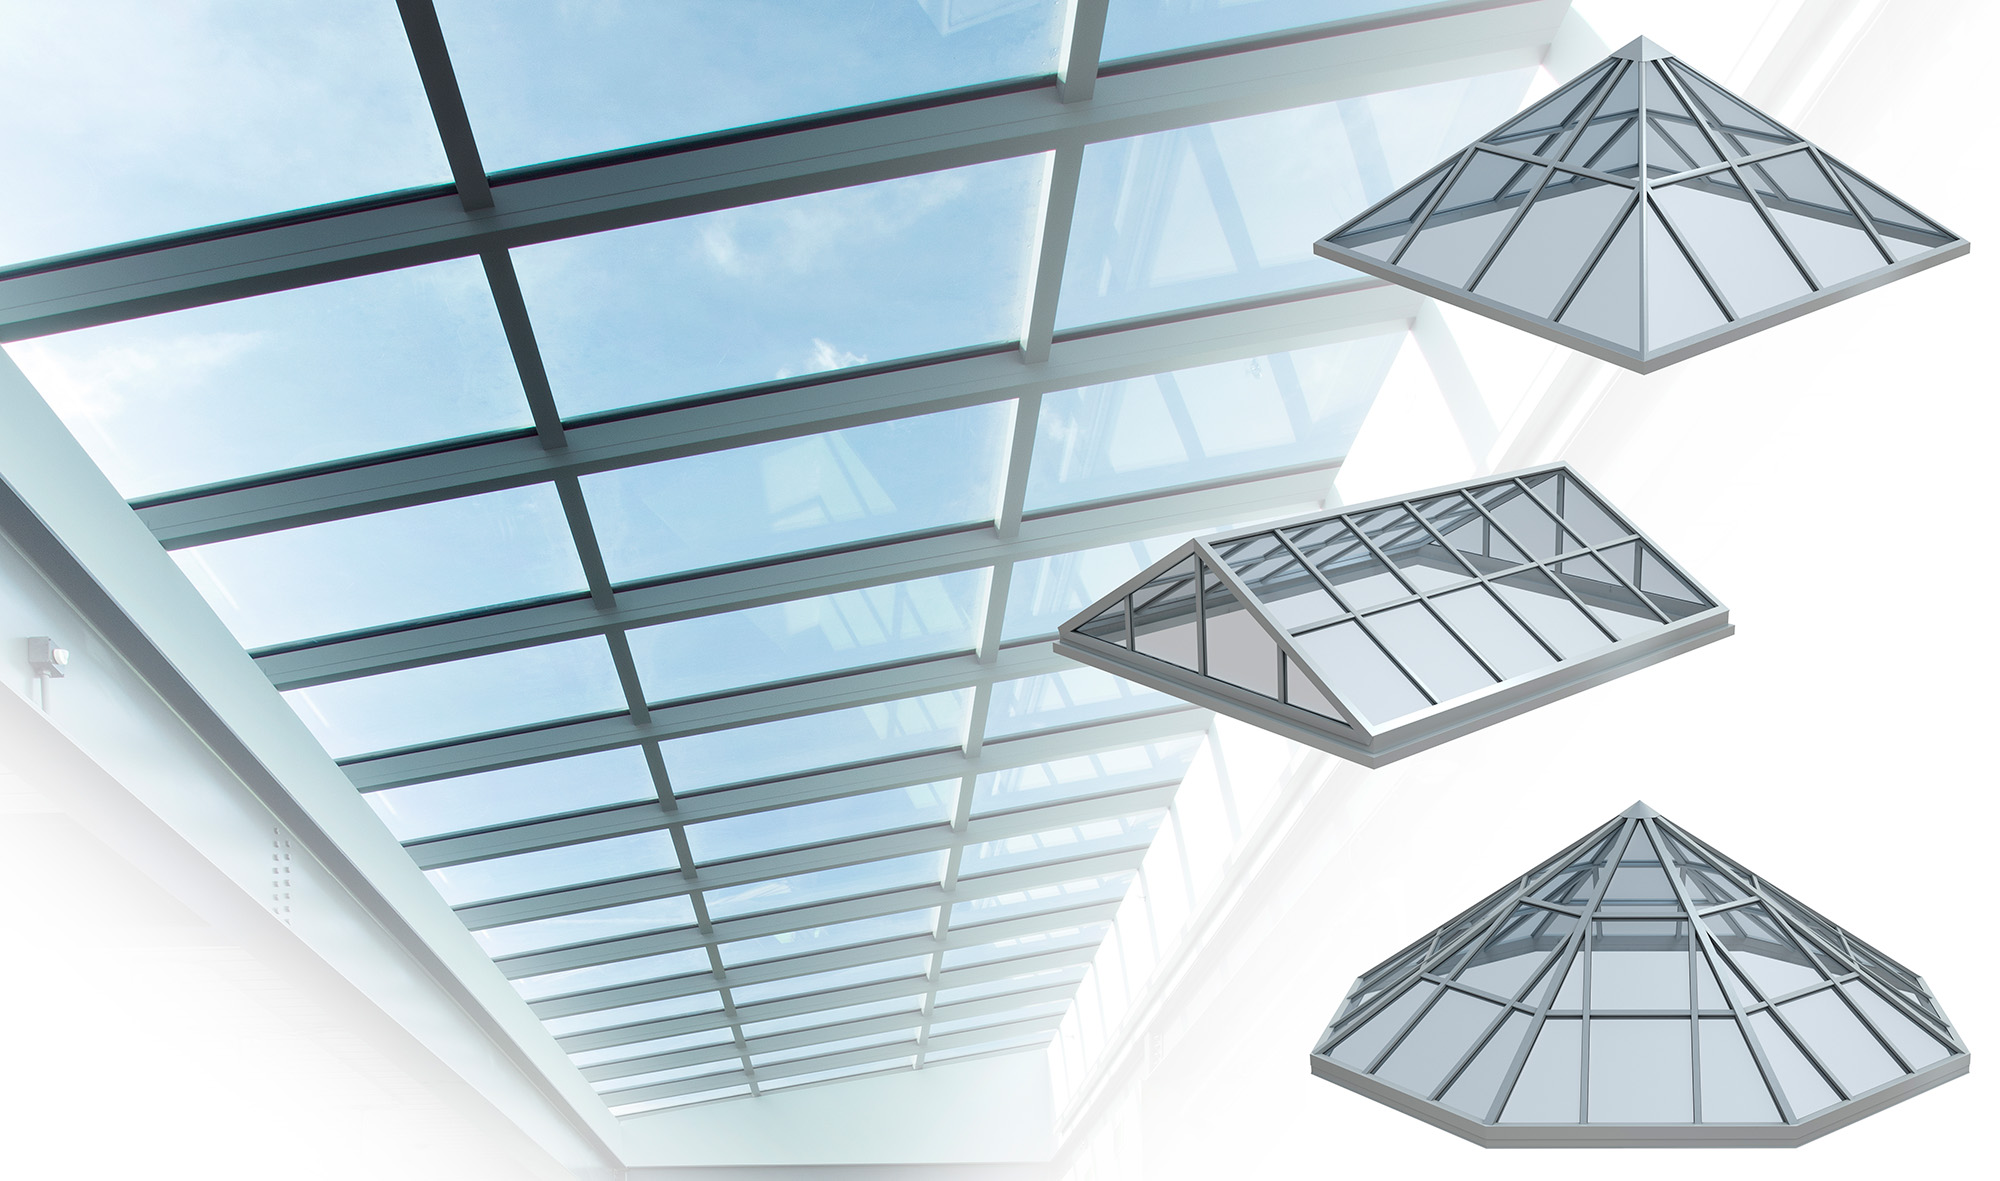 Skylight building product image